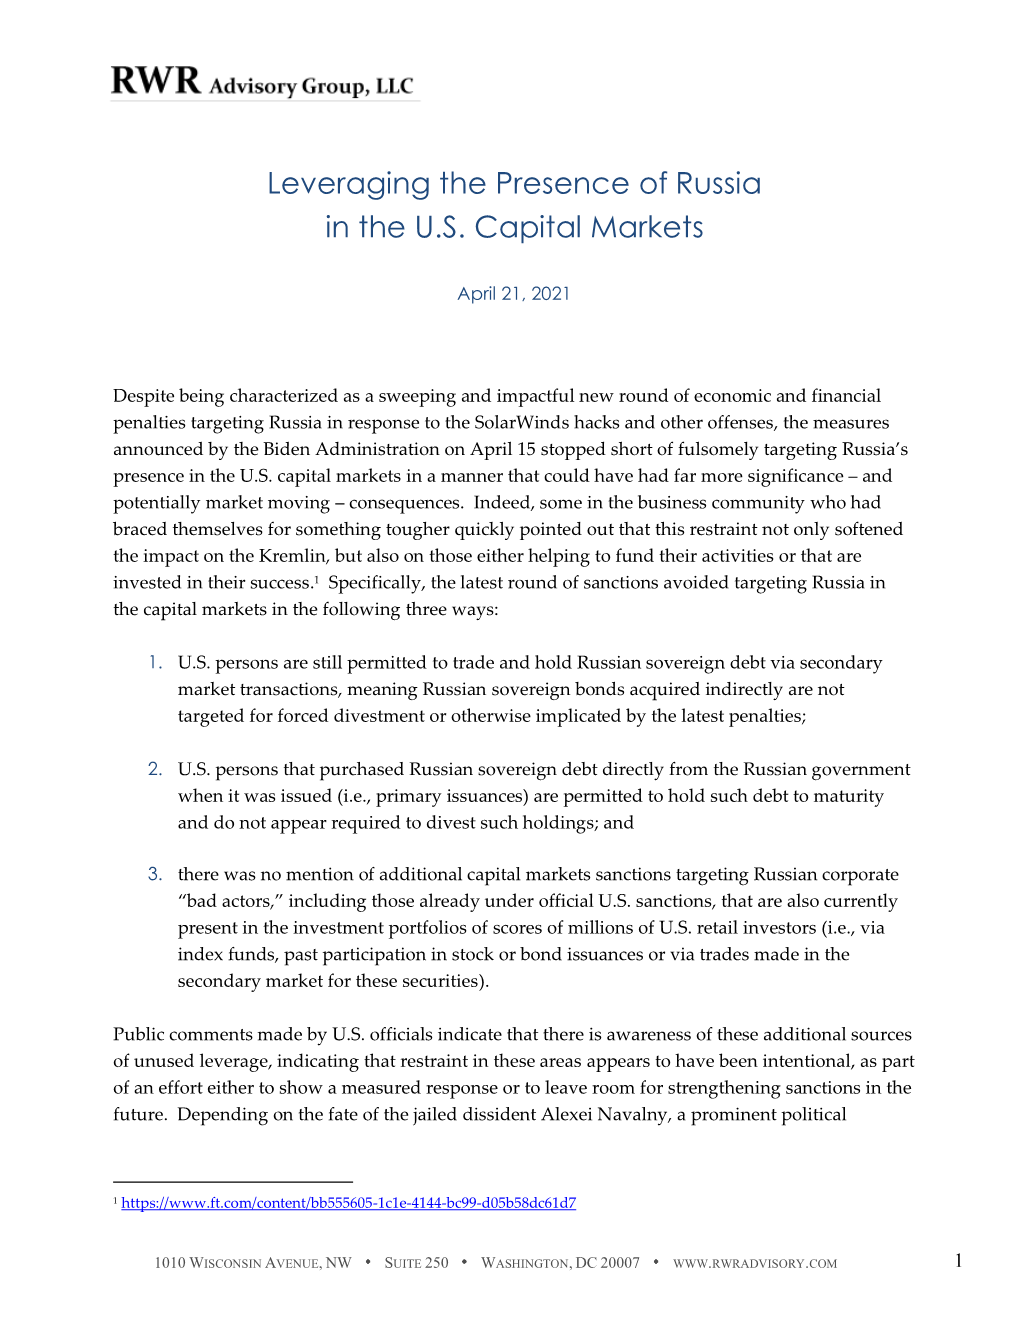 Leveraging the Presence of Russia in the U.S. Capital Markets